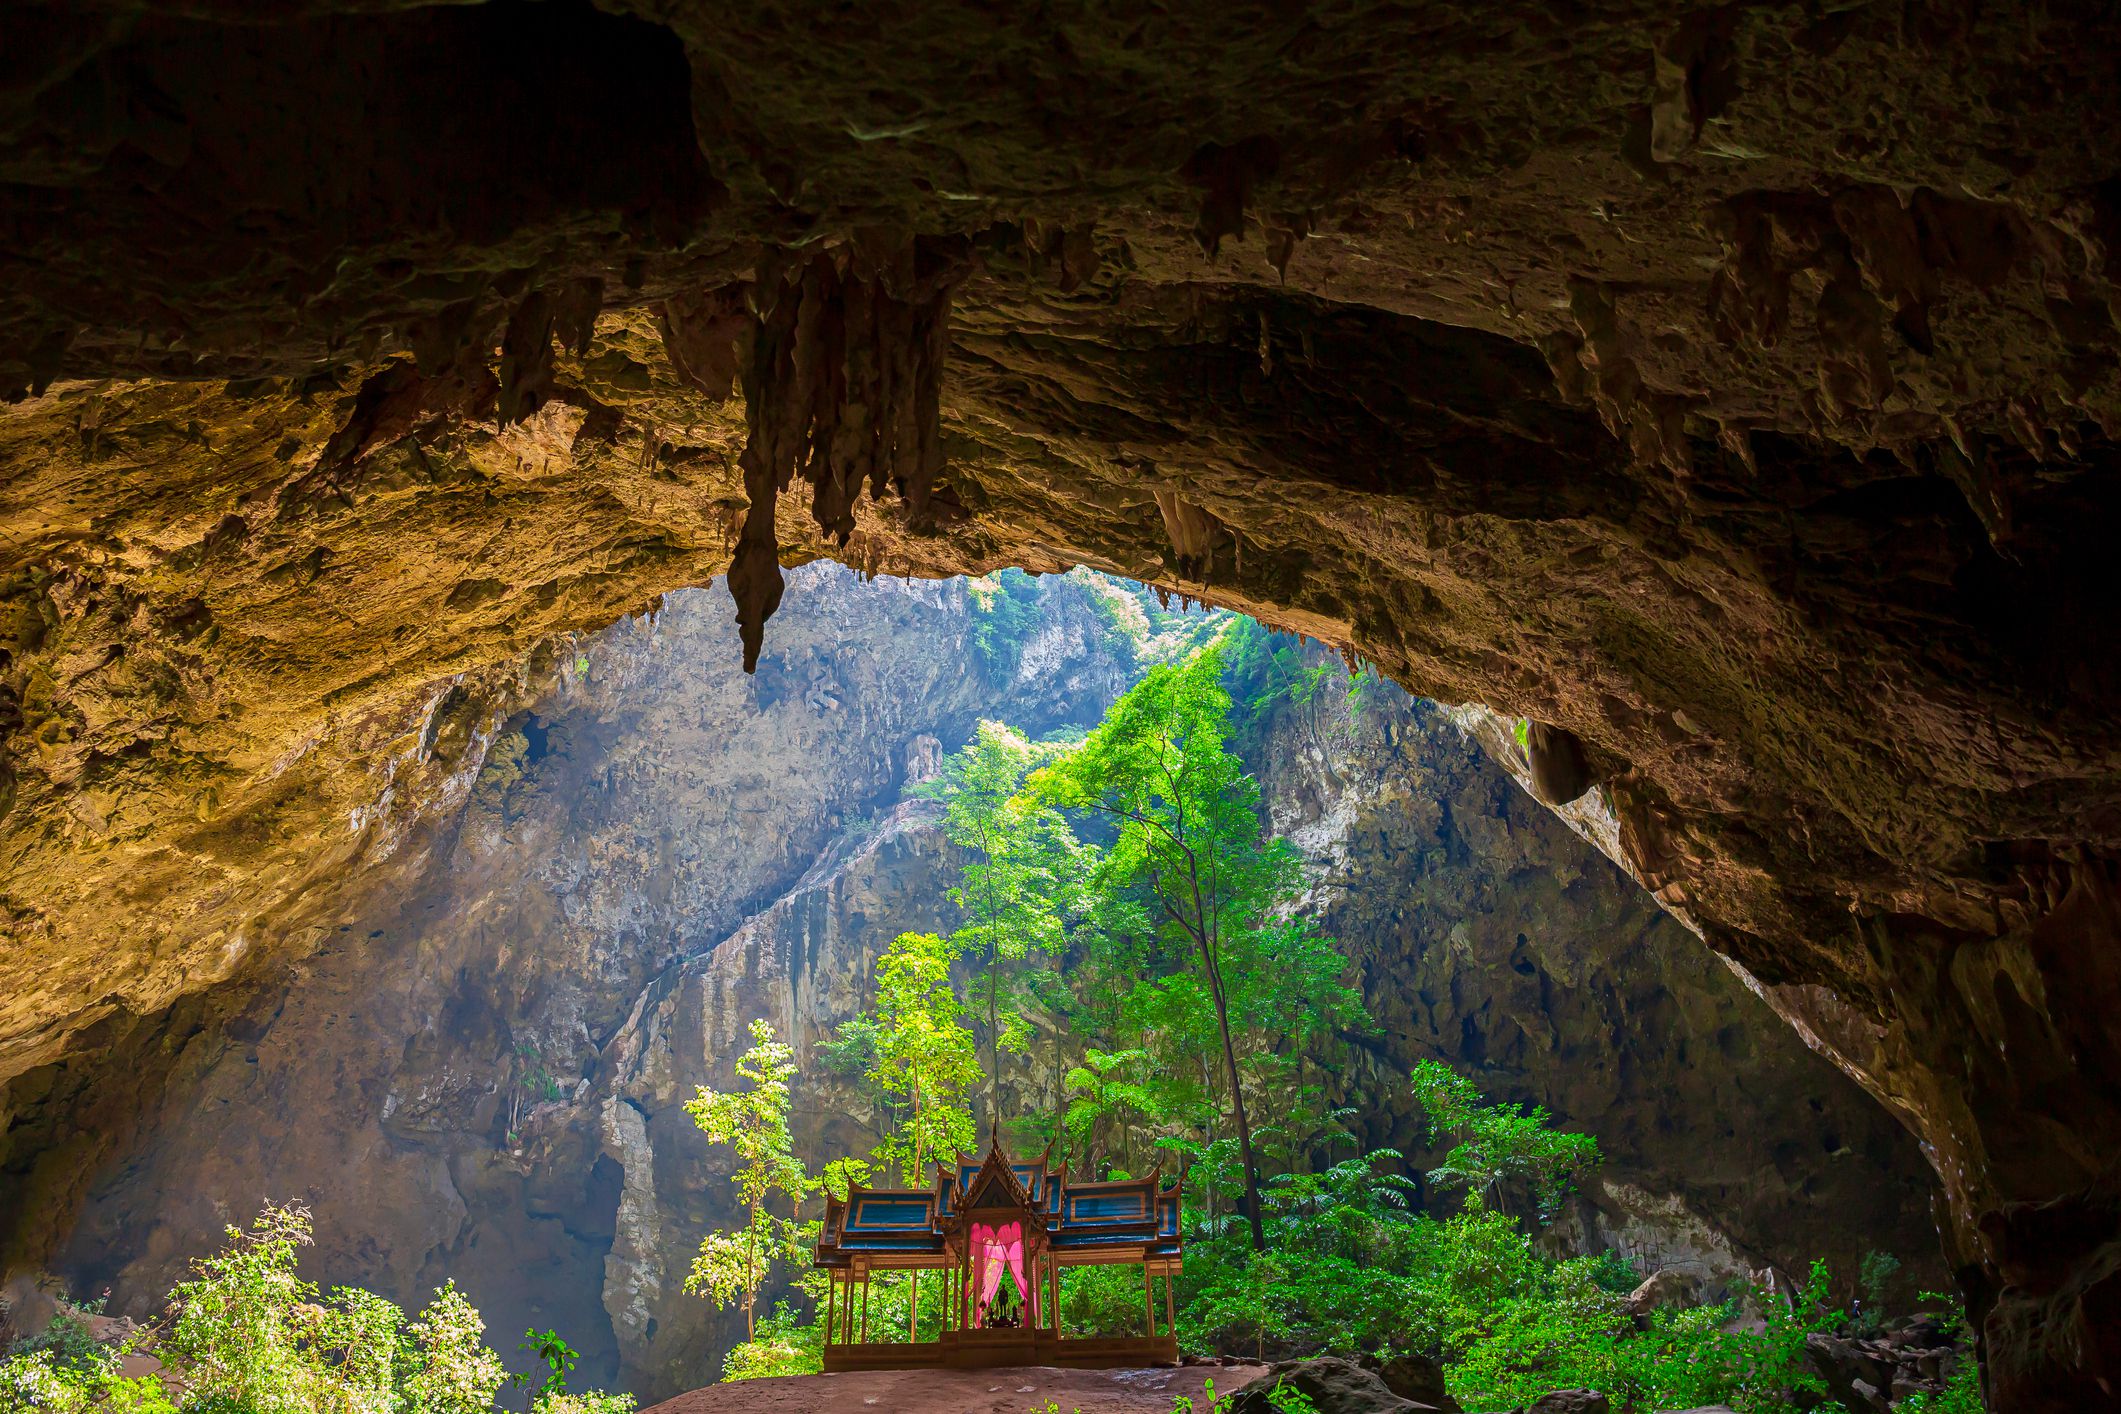 Slide 17 of 52: Located in Khao Sam Roi Yot National Park in Thailand, this cave has a small golden pavilion hidden within its recesses.   